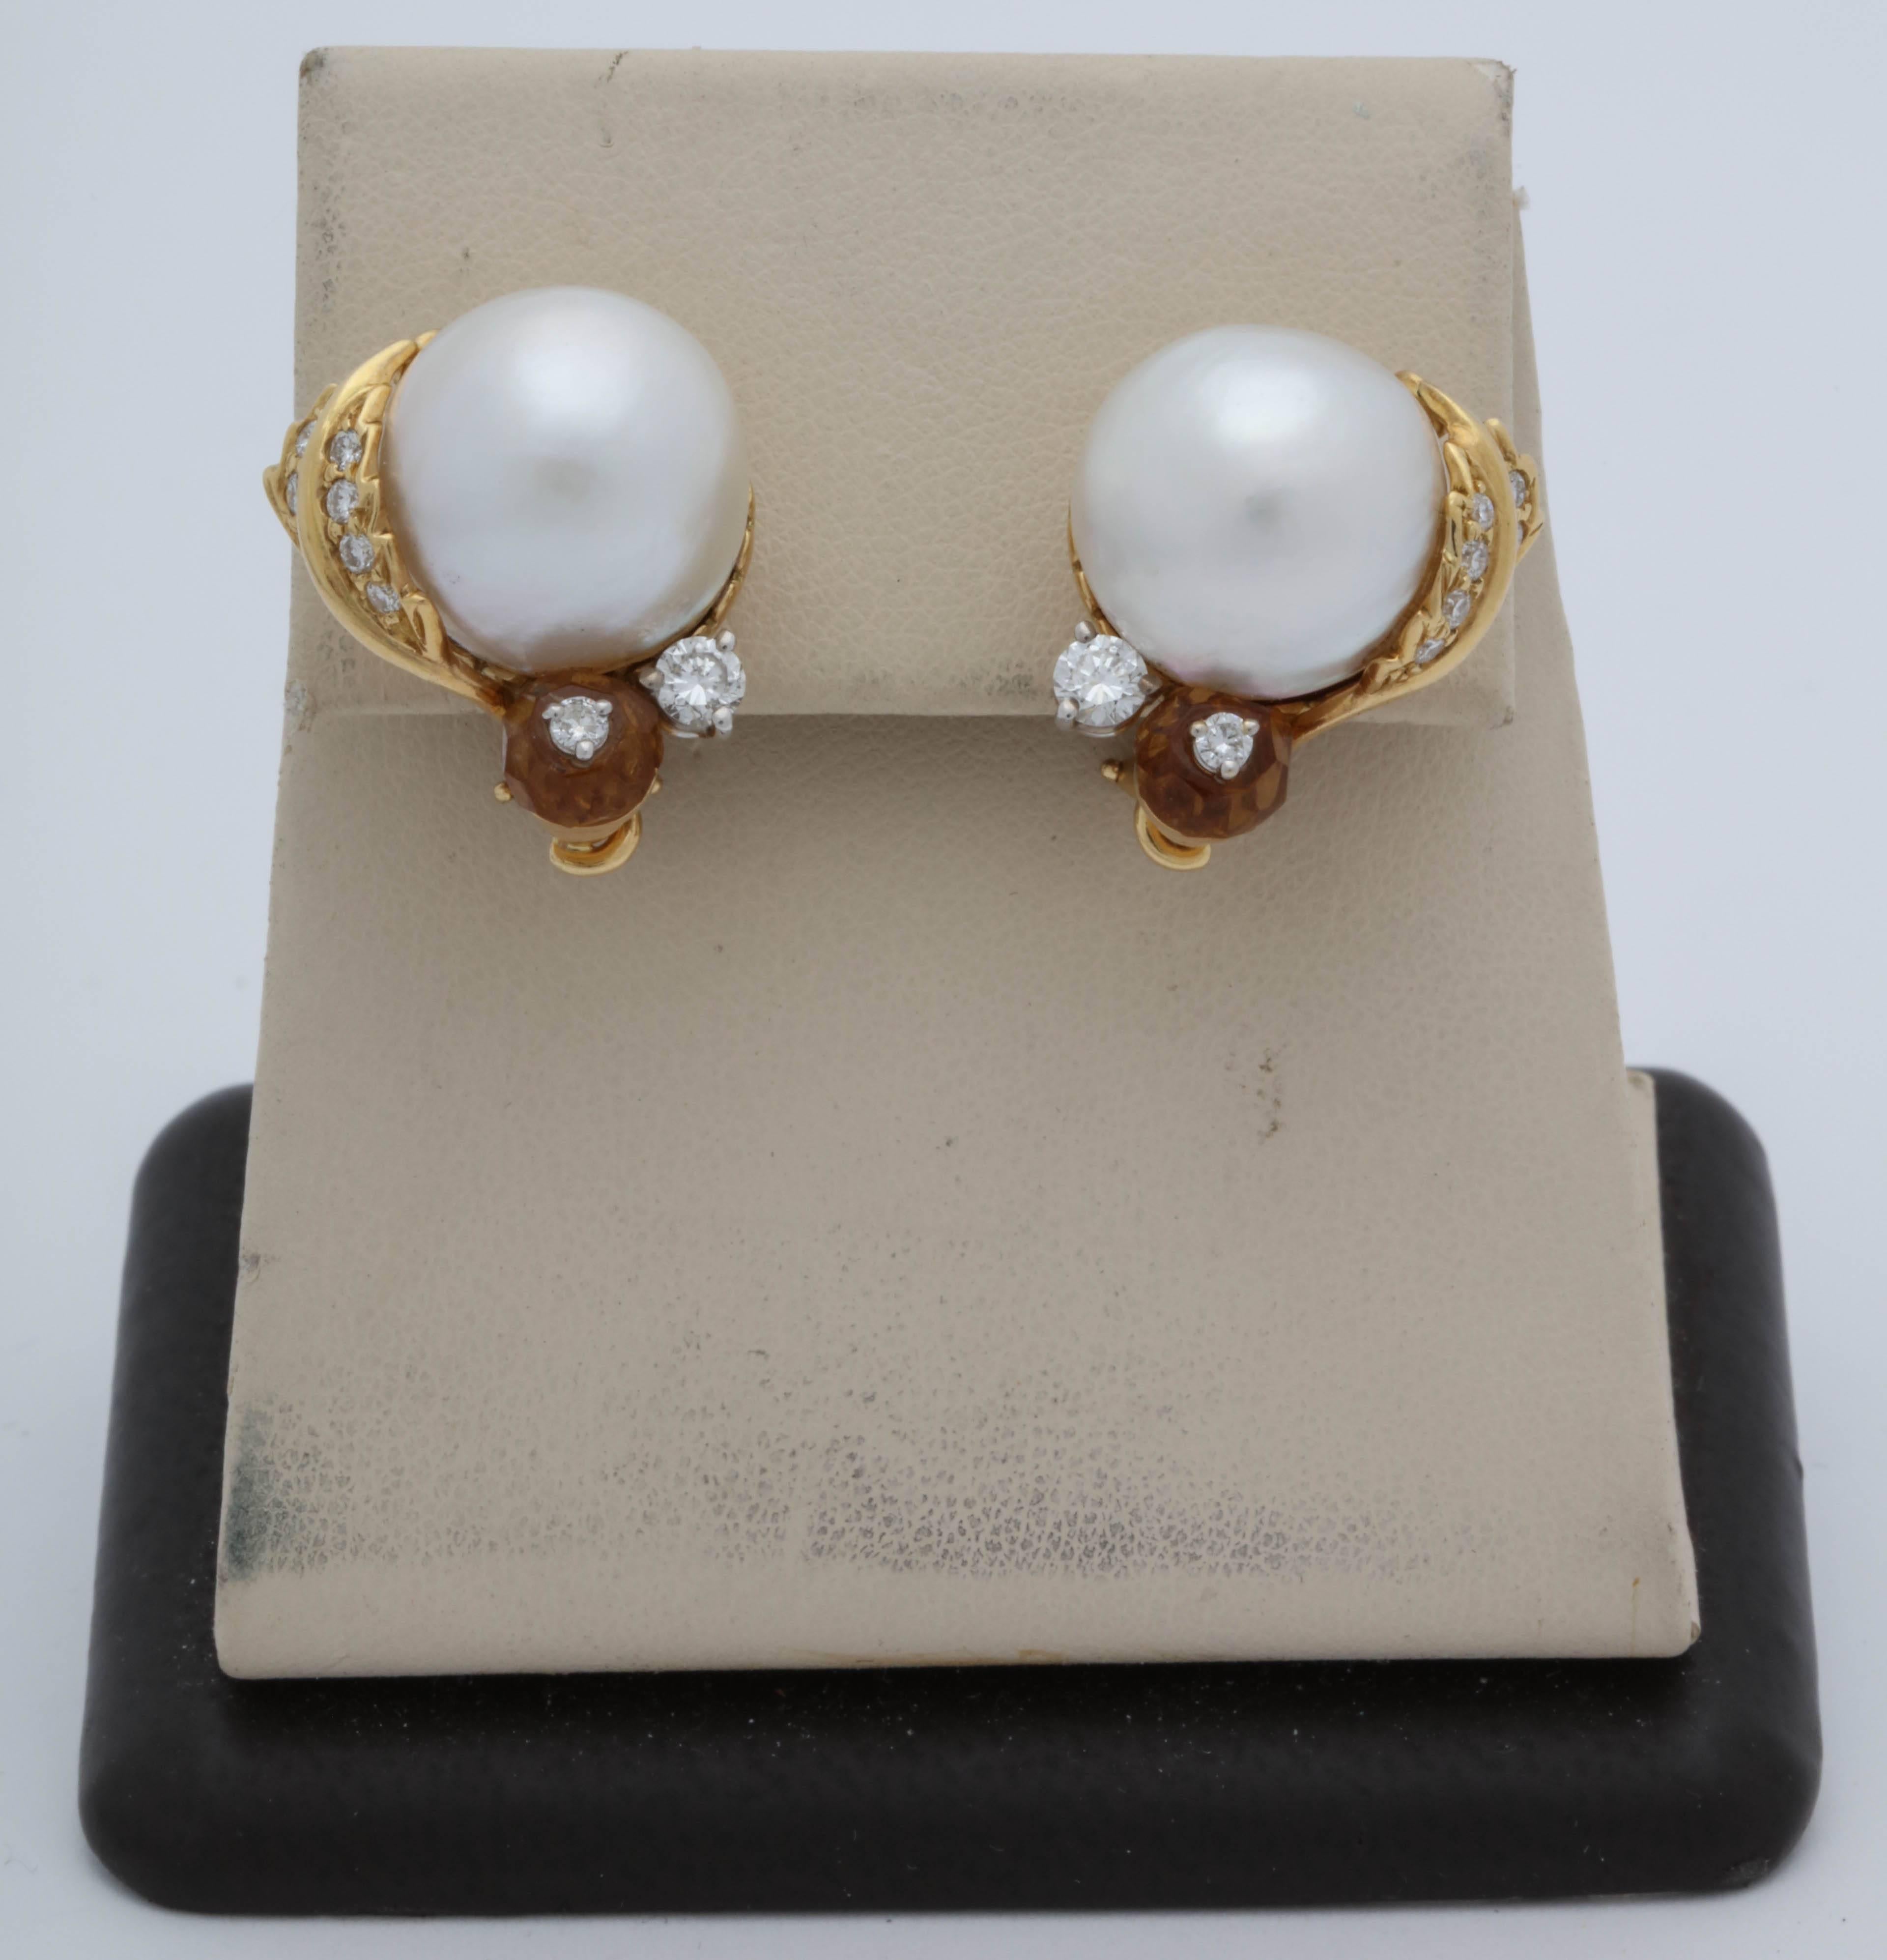 One Pair Of Ladies Large South sea Pearl earrings Centering A 13MM Large Beautiful Quality South Sea Pearl. Earclips Are Further Designed With A Briloote Cut Faceted cut Citrine With diamonds In Center Of The Citrine. Earrings Are Further Designed